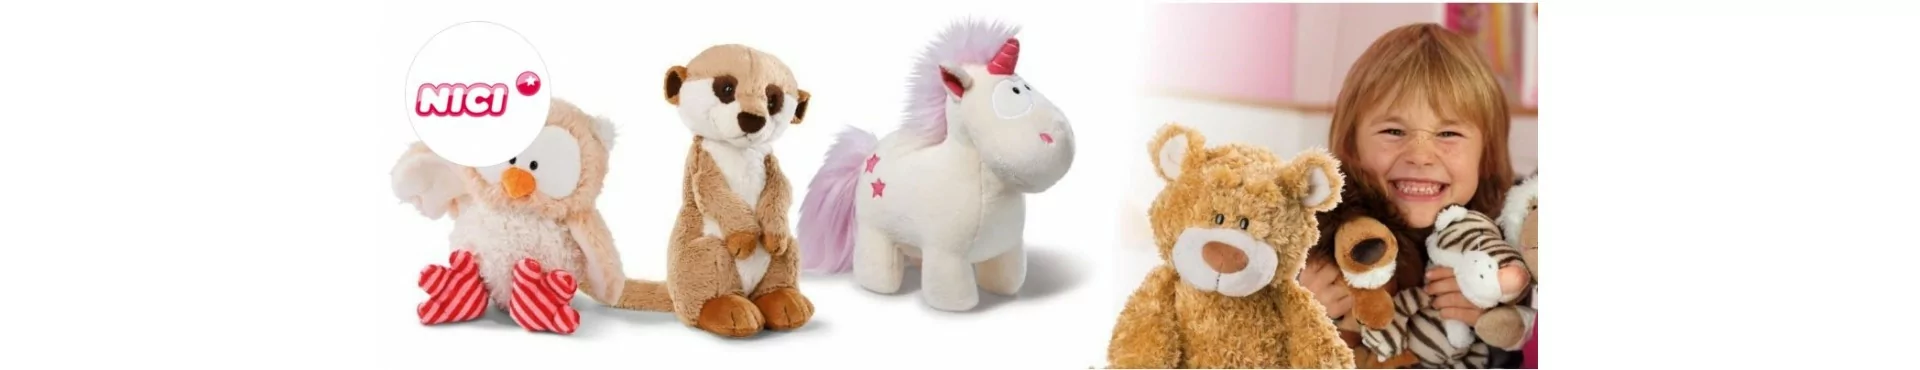 Les peluches animales Nici World of Friends